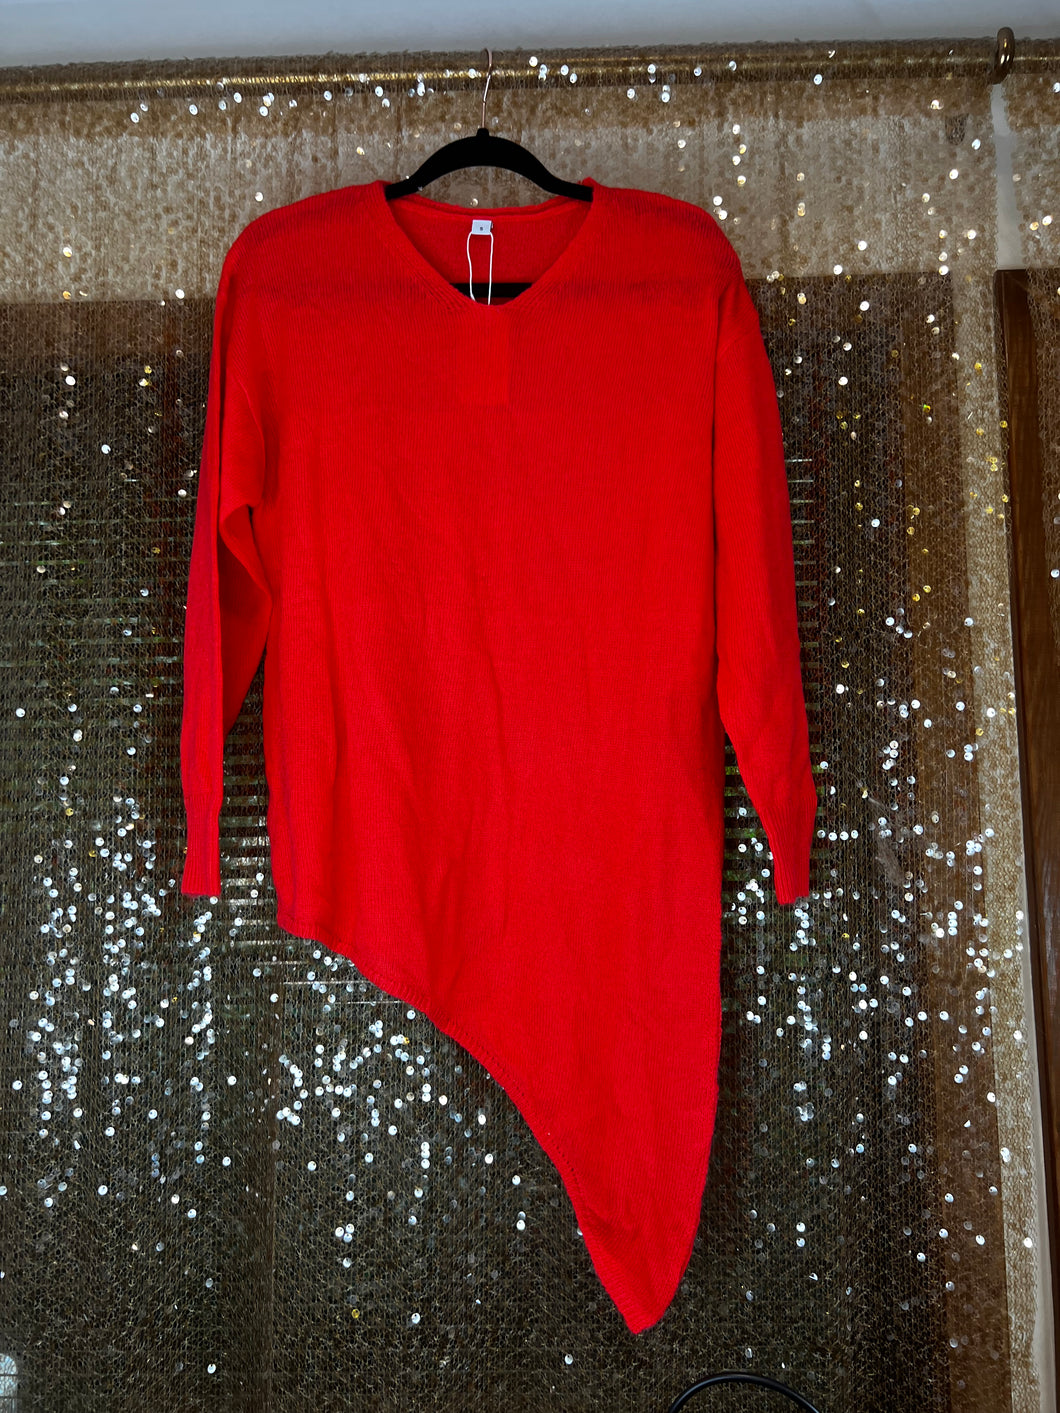 Red Sweater with Diagonal hem at bottom